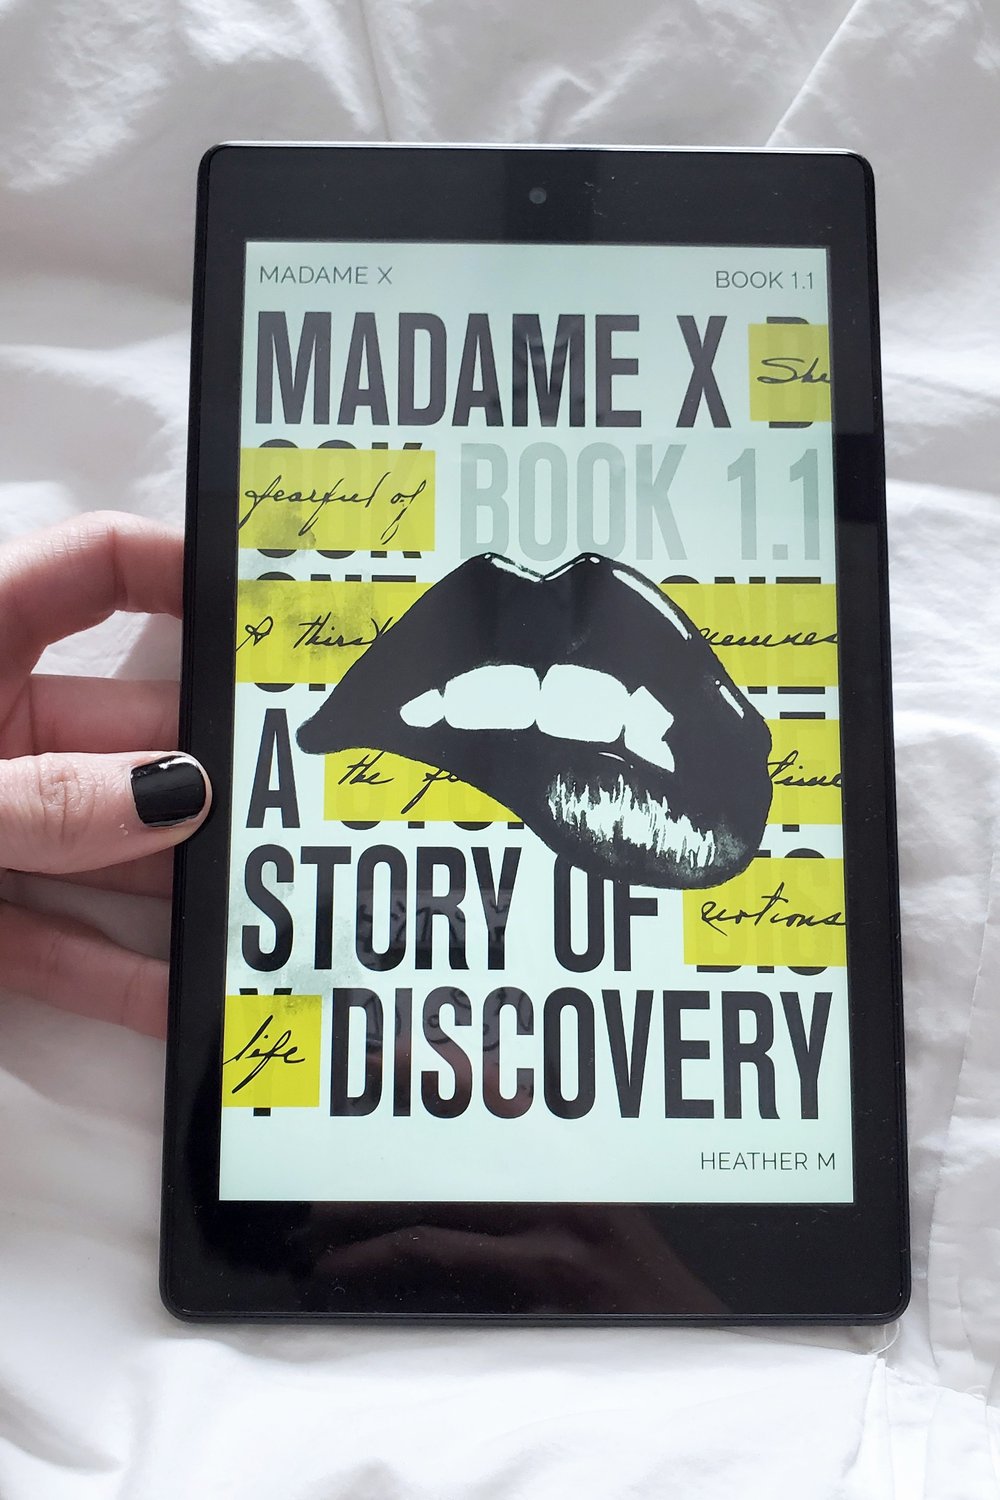   Madame X Book 1.1  debuts in November 2019 in ebook format across Amazon, Barnes &amp; Noble, Smashbooks and Apple Books. I am a proud newbie author. 